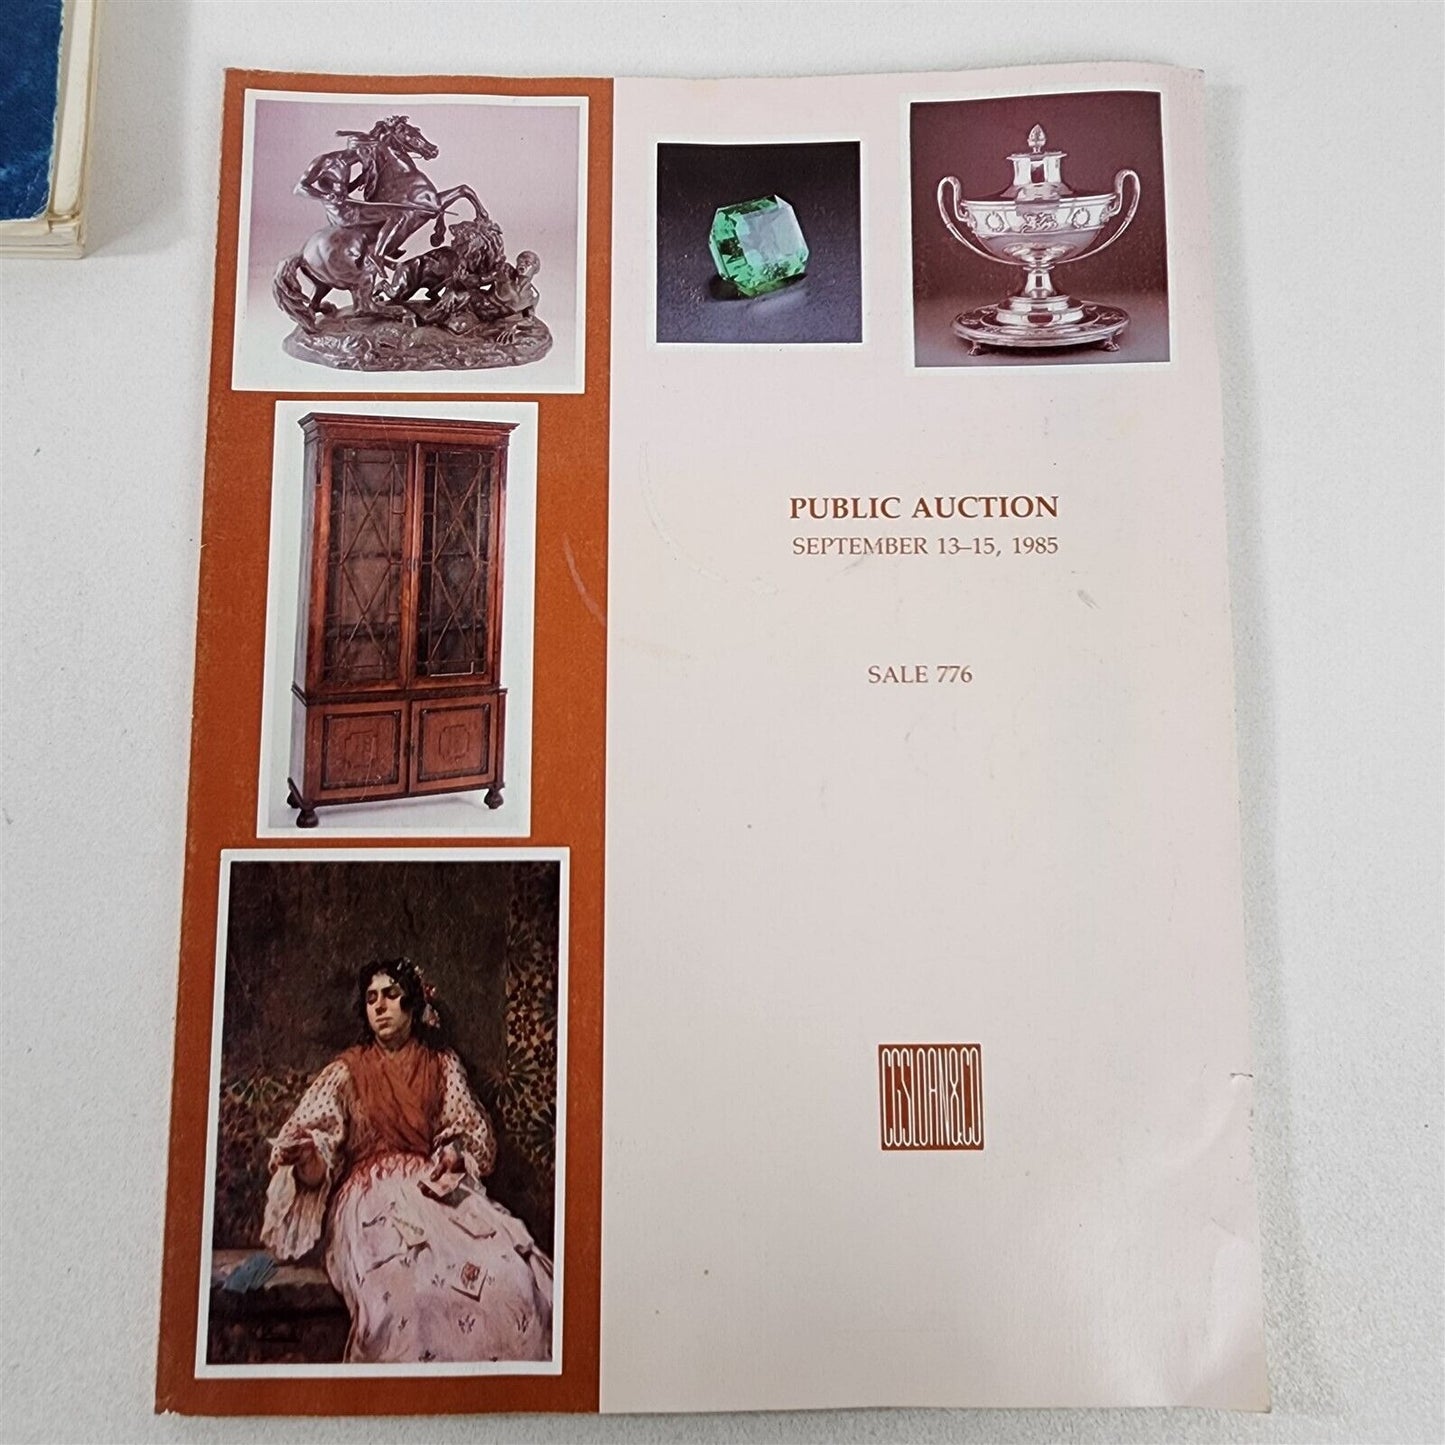 3 Vintage Auction Catalogs CB Charles 1973, CG Sloan 1985, Philips 1991